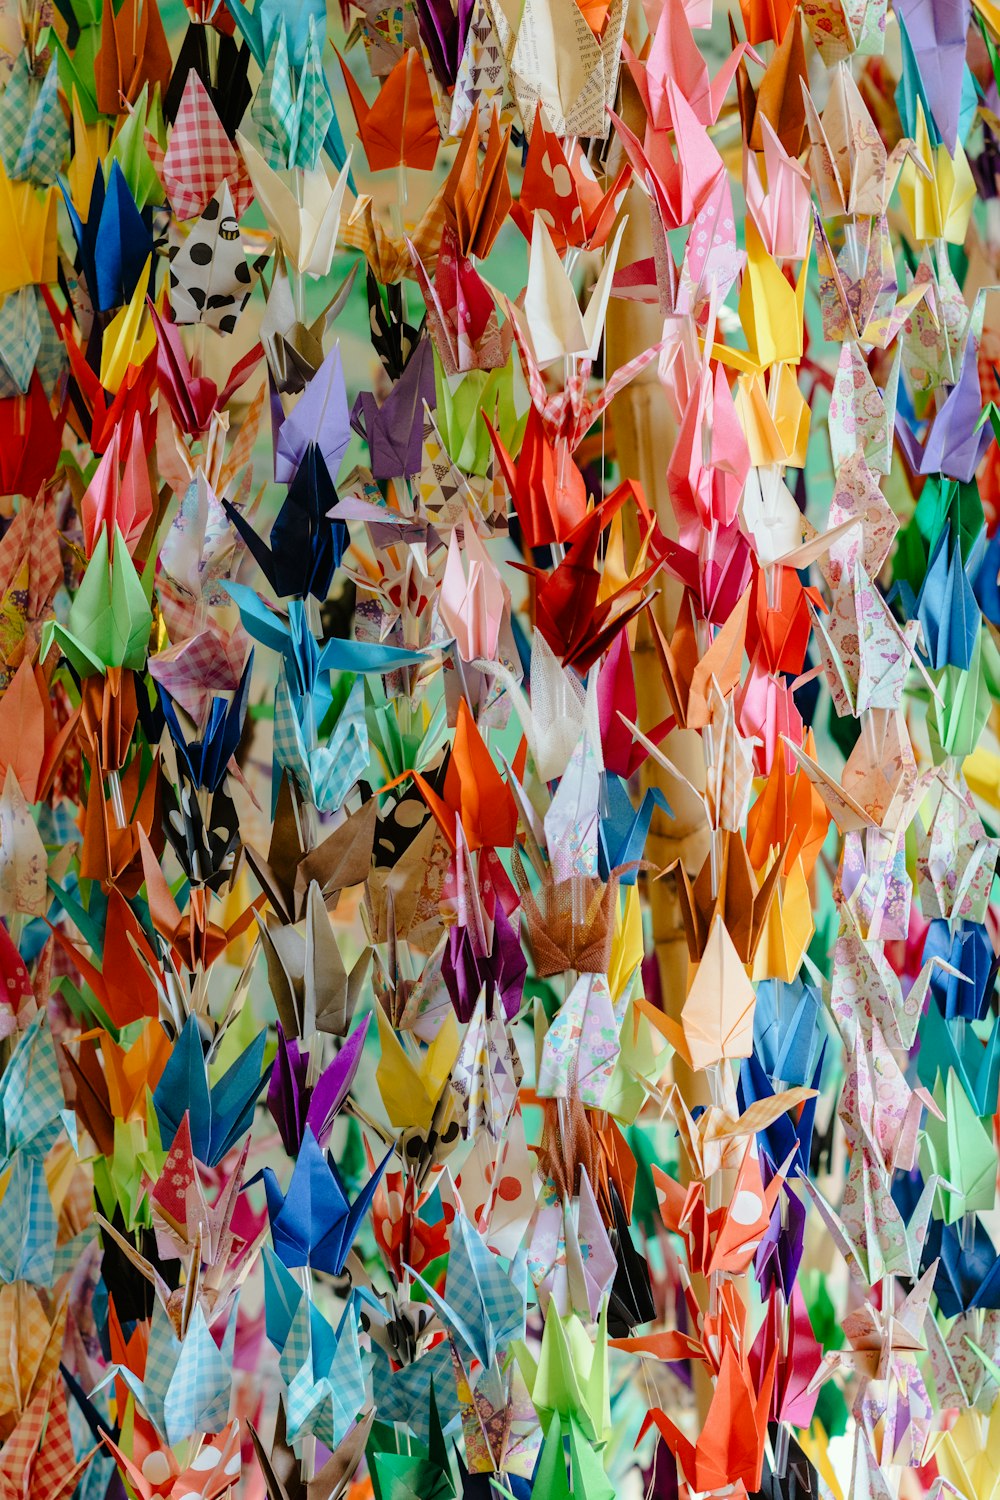 a large amount of colorful origami cranes